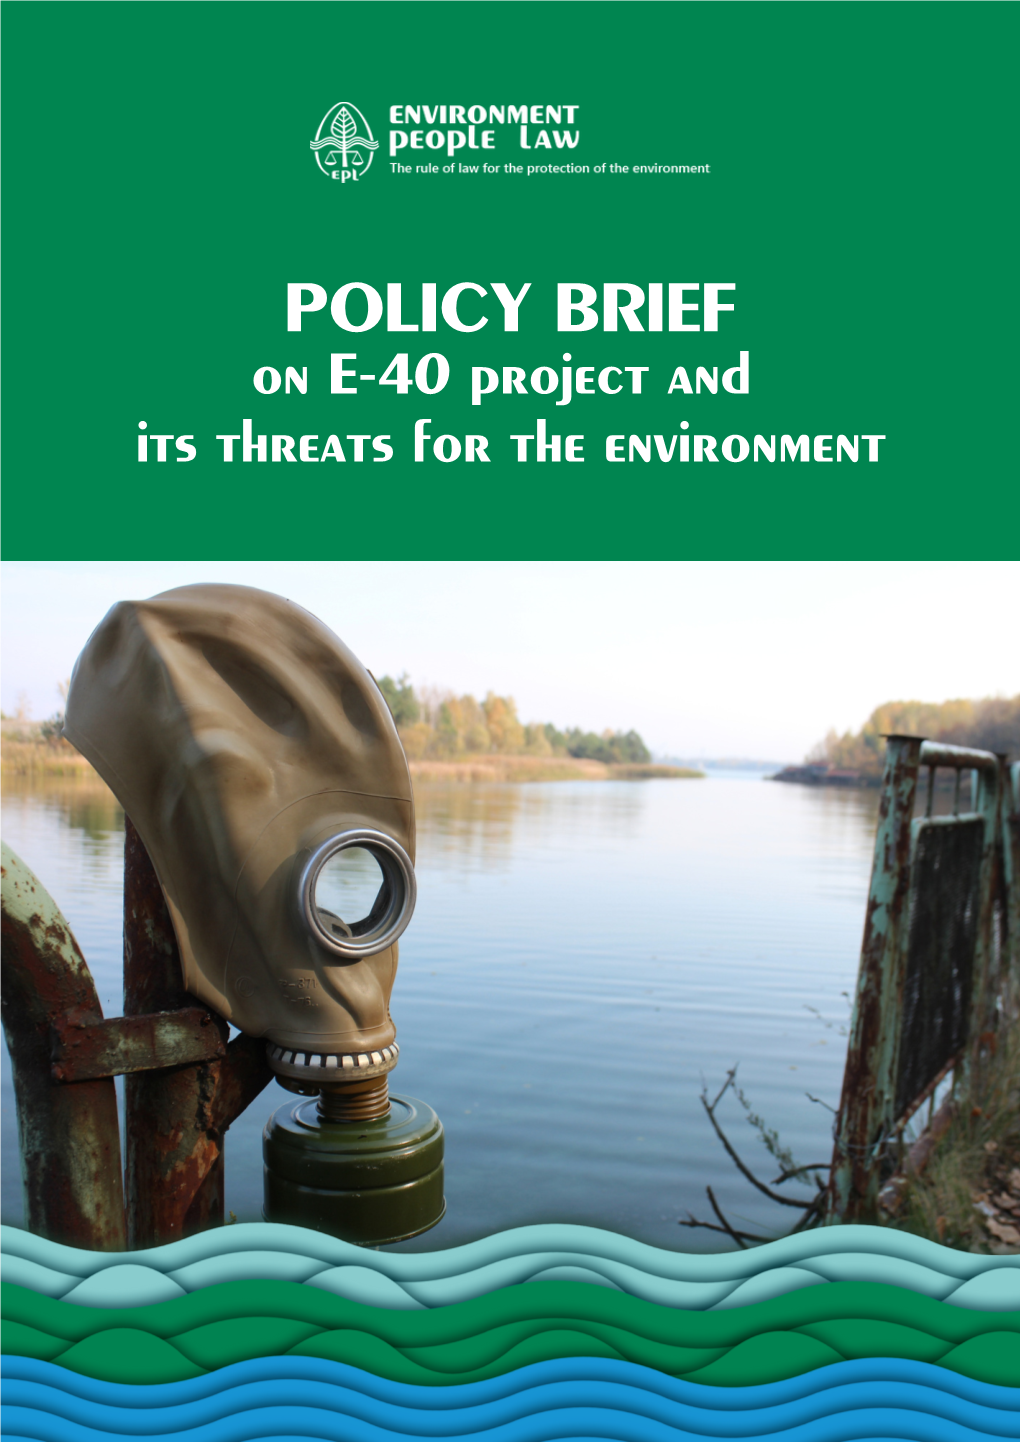 POLICY BRIEF on E-40 Project and Its Threats for the Environment Policy Brief